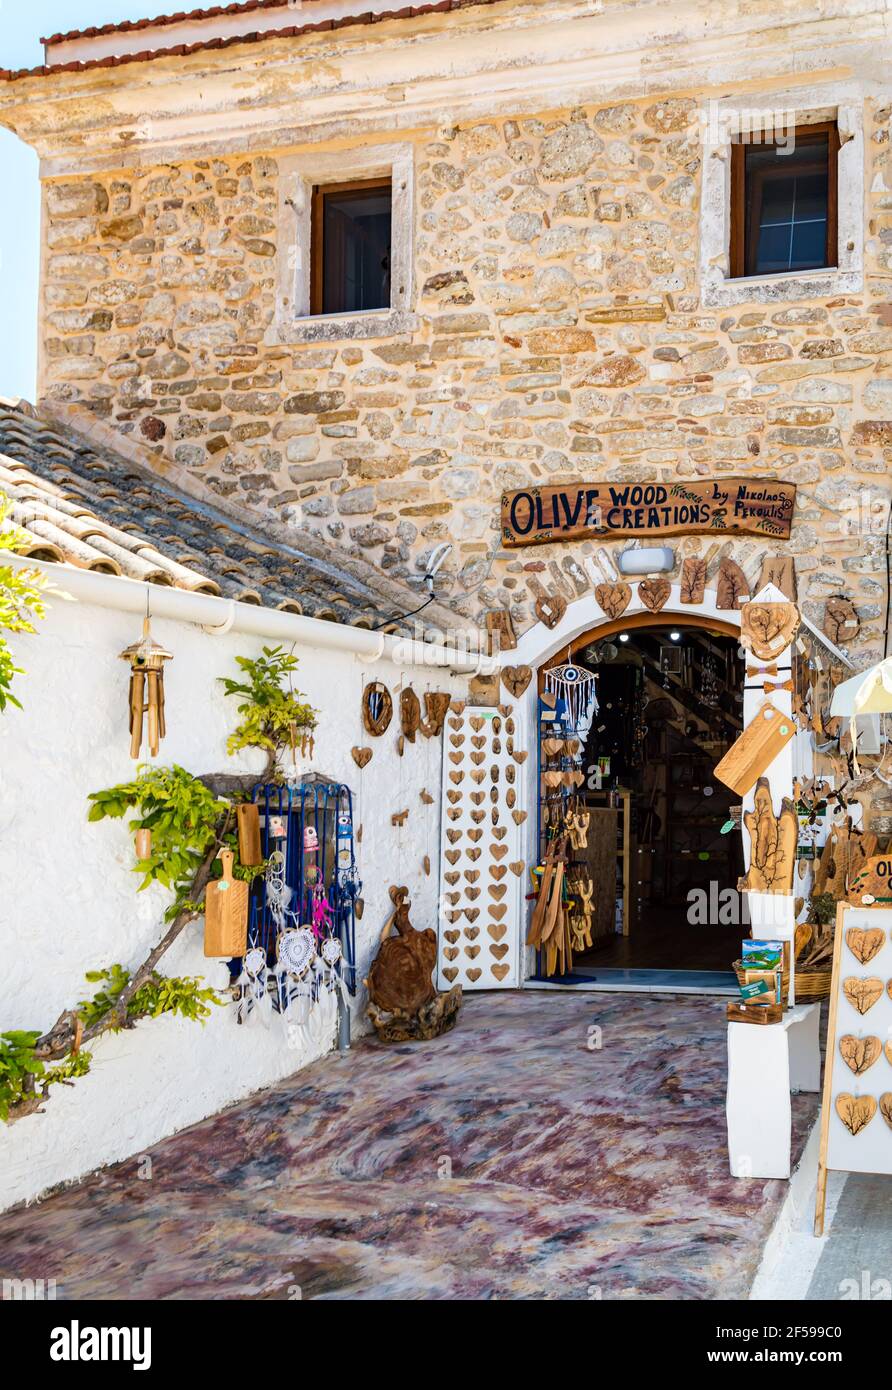 Afionas, Corfu, Greece - Aug 03, 2020: artesian shop of handmade olive wood articles and souvenirs in ancient greek house in old Afionas village on Stock Photo